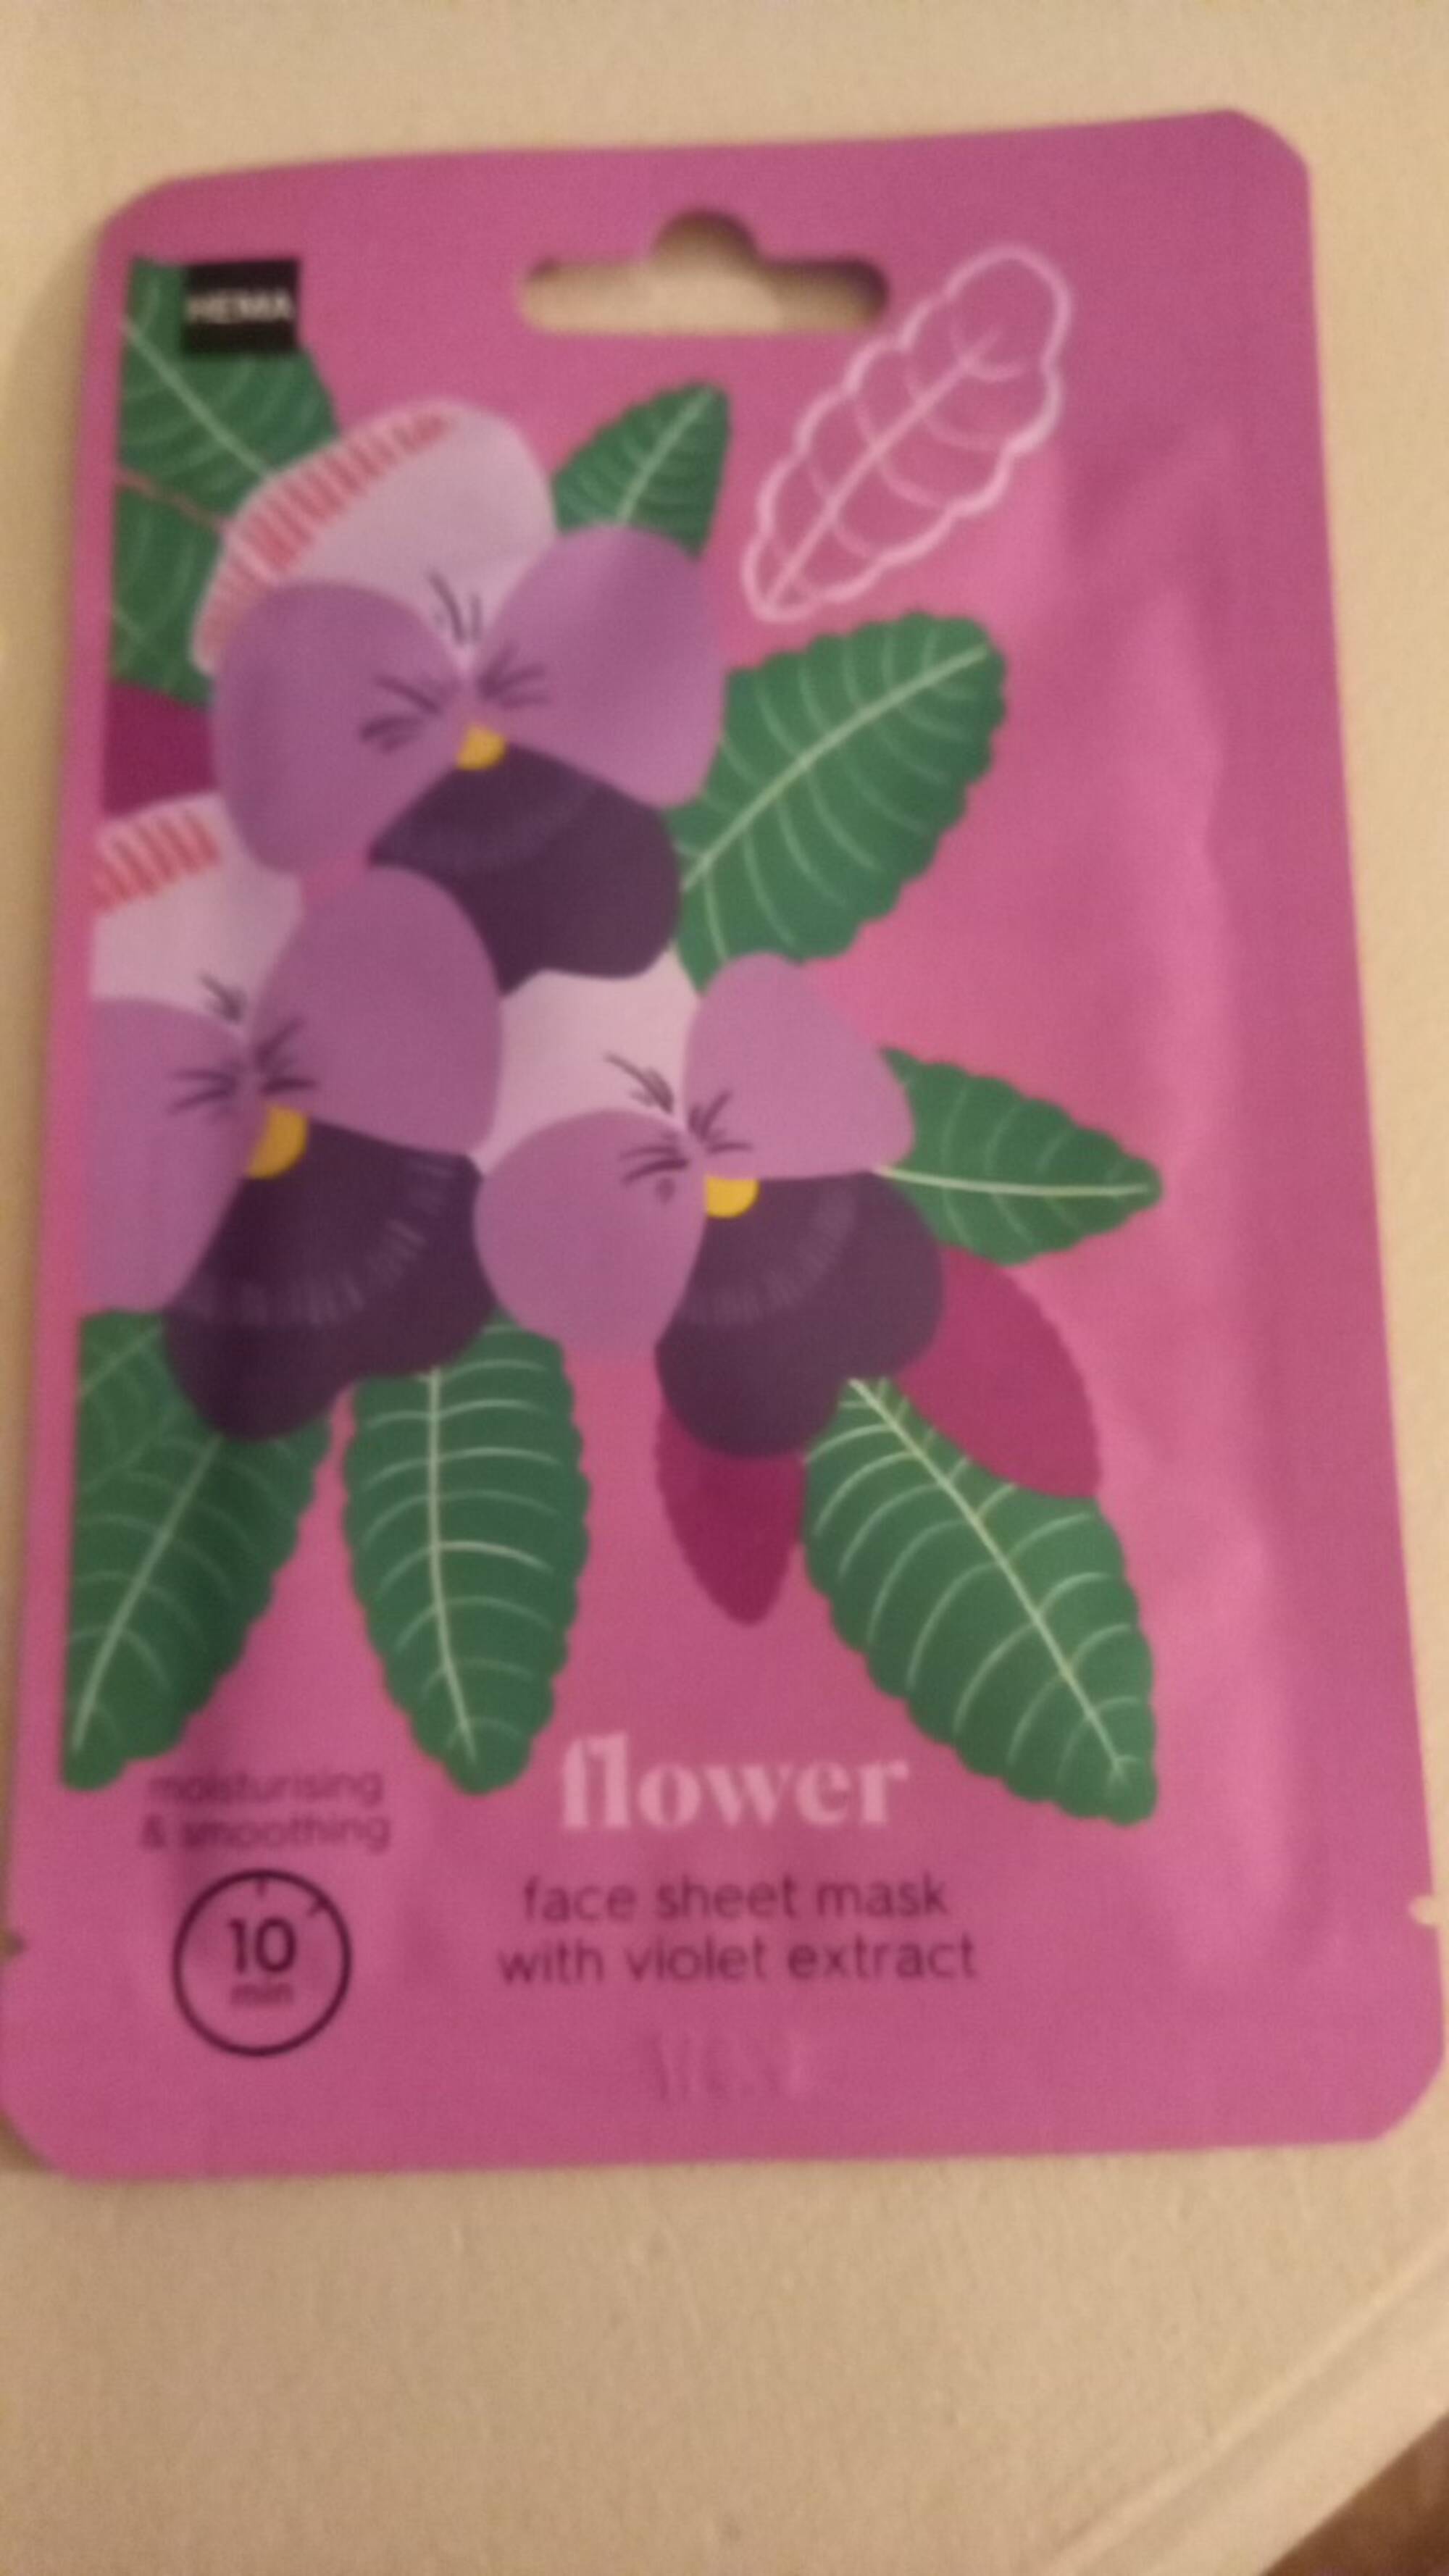 HEMA - Flower - Face sheet mask with violet extract